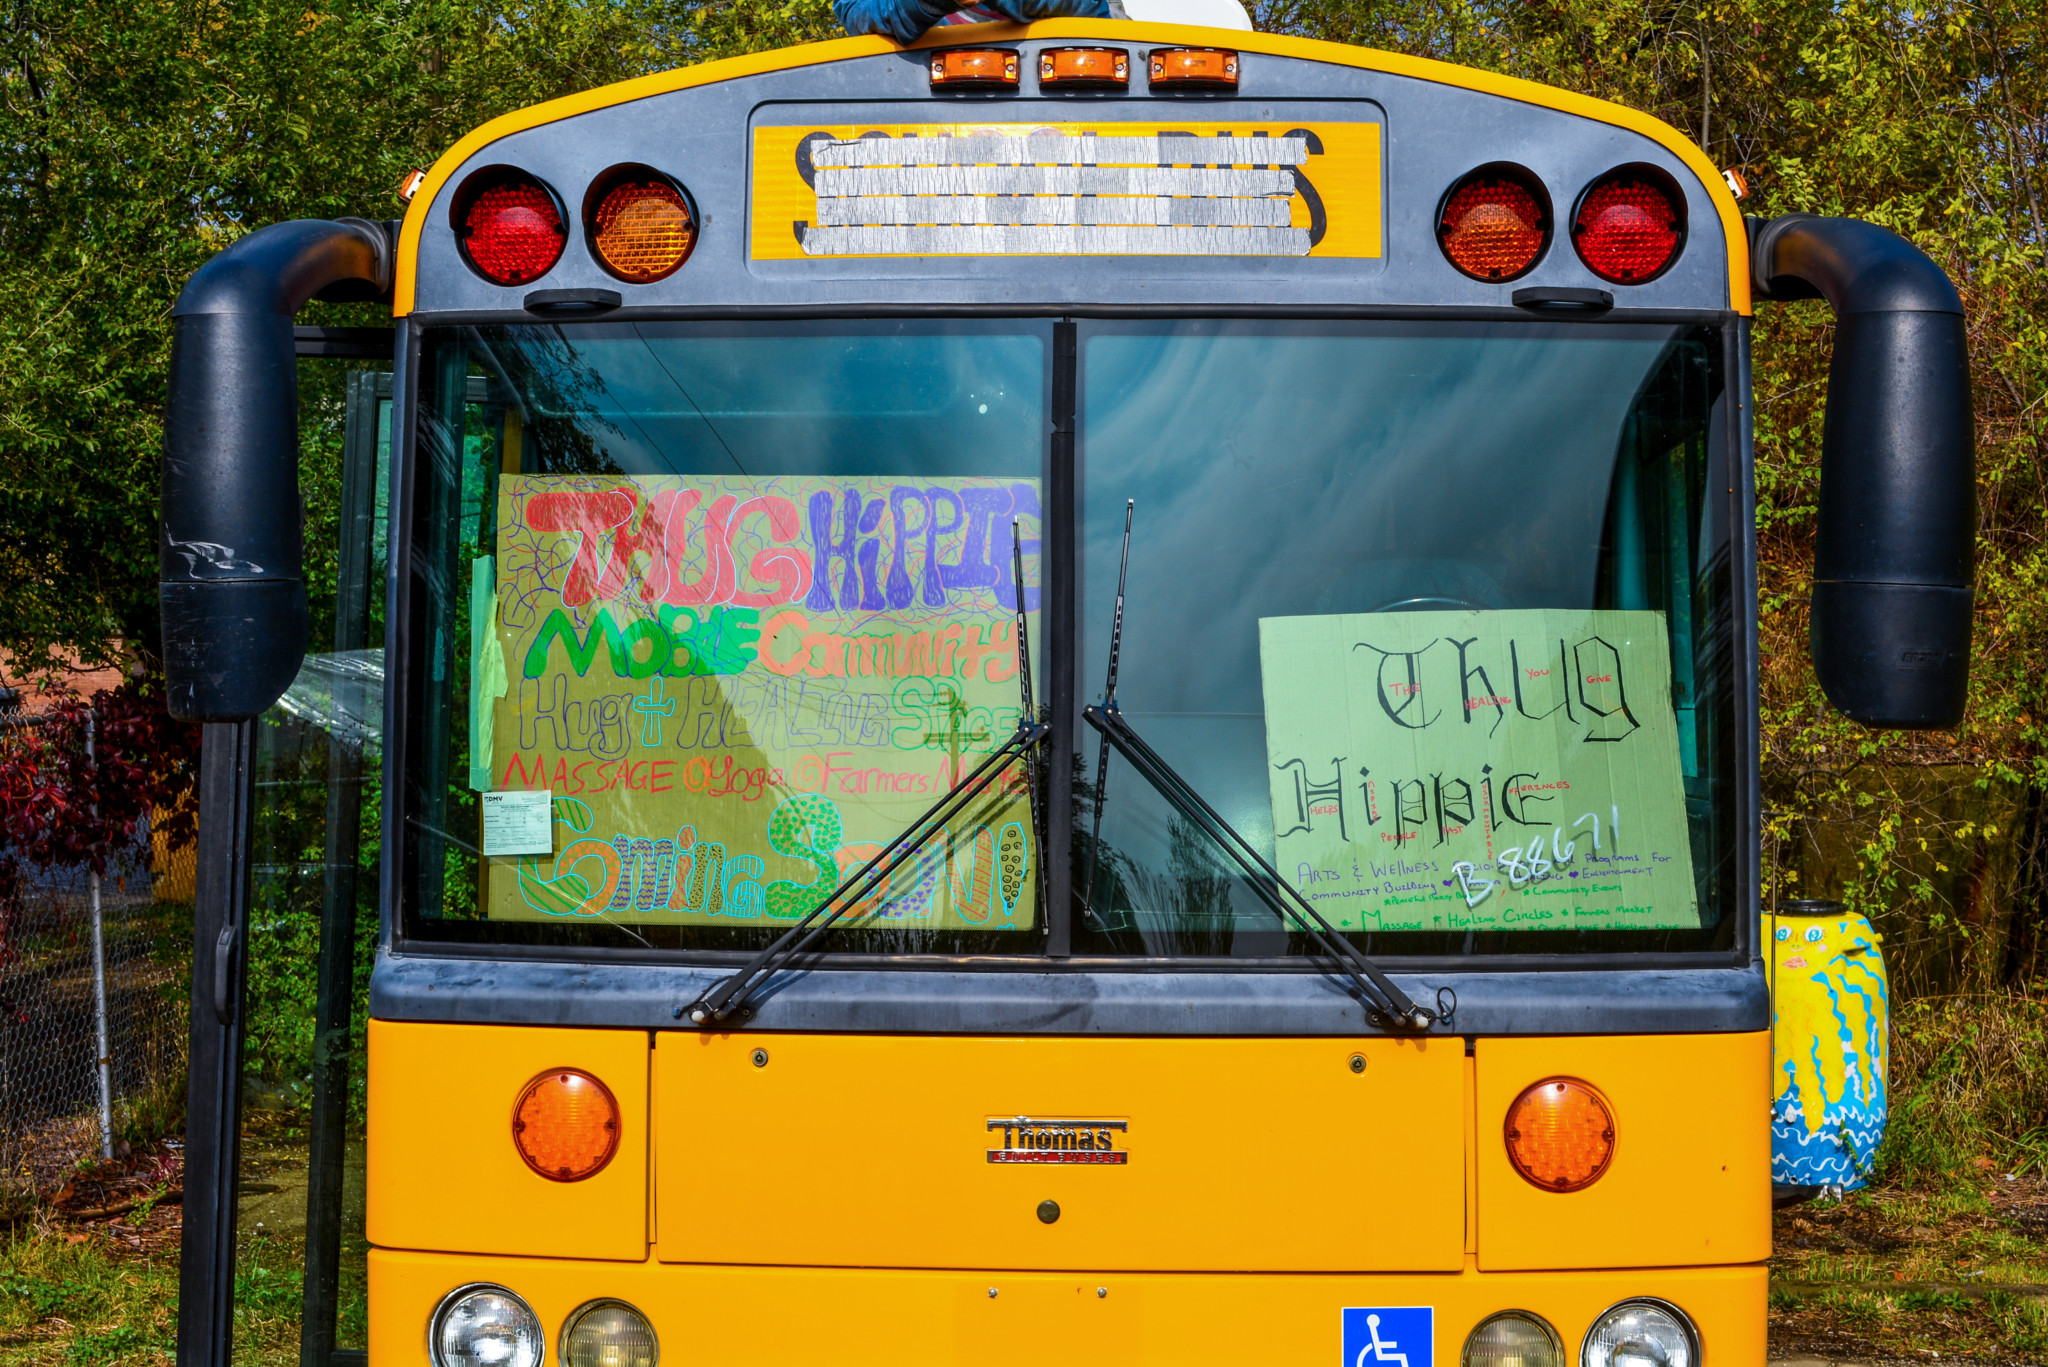 E A Williams. Thug Hippie Bus. Photo Credit: Brittany Norment